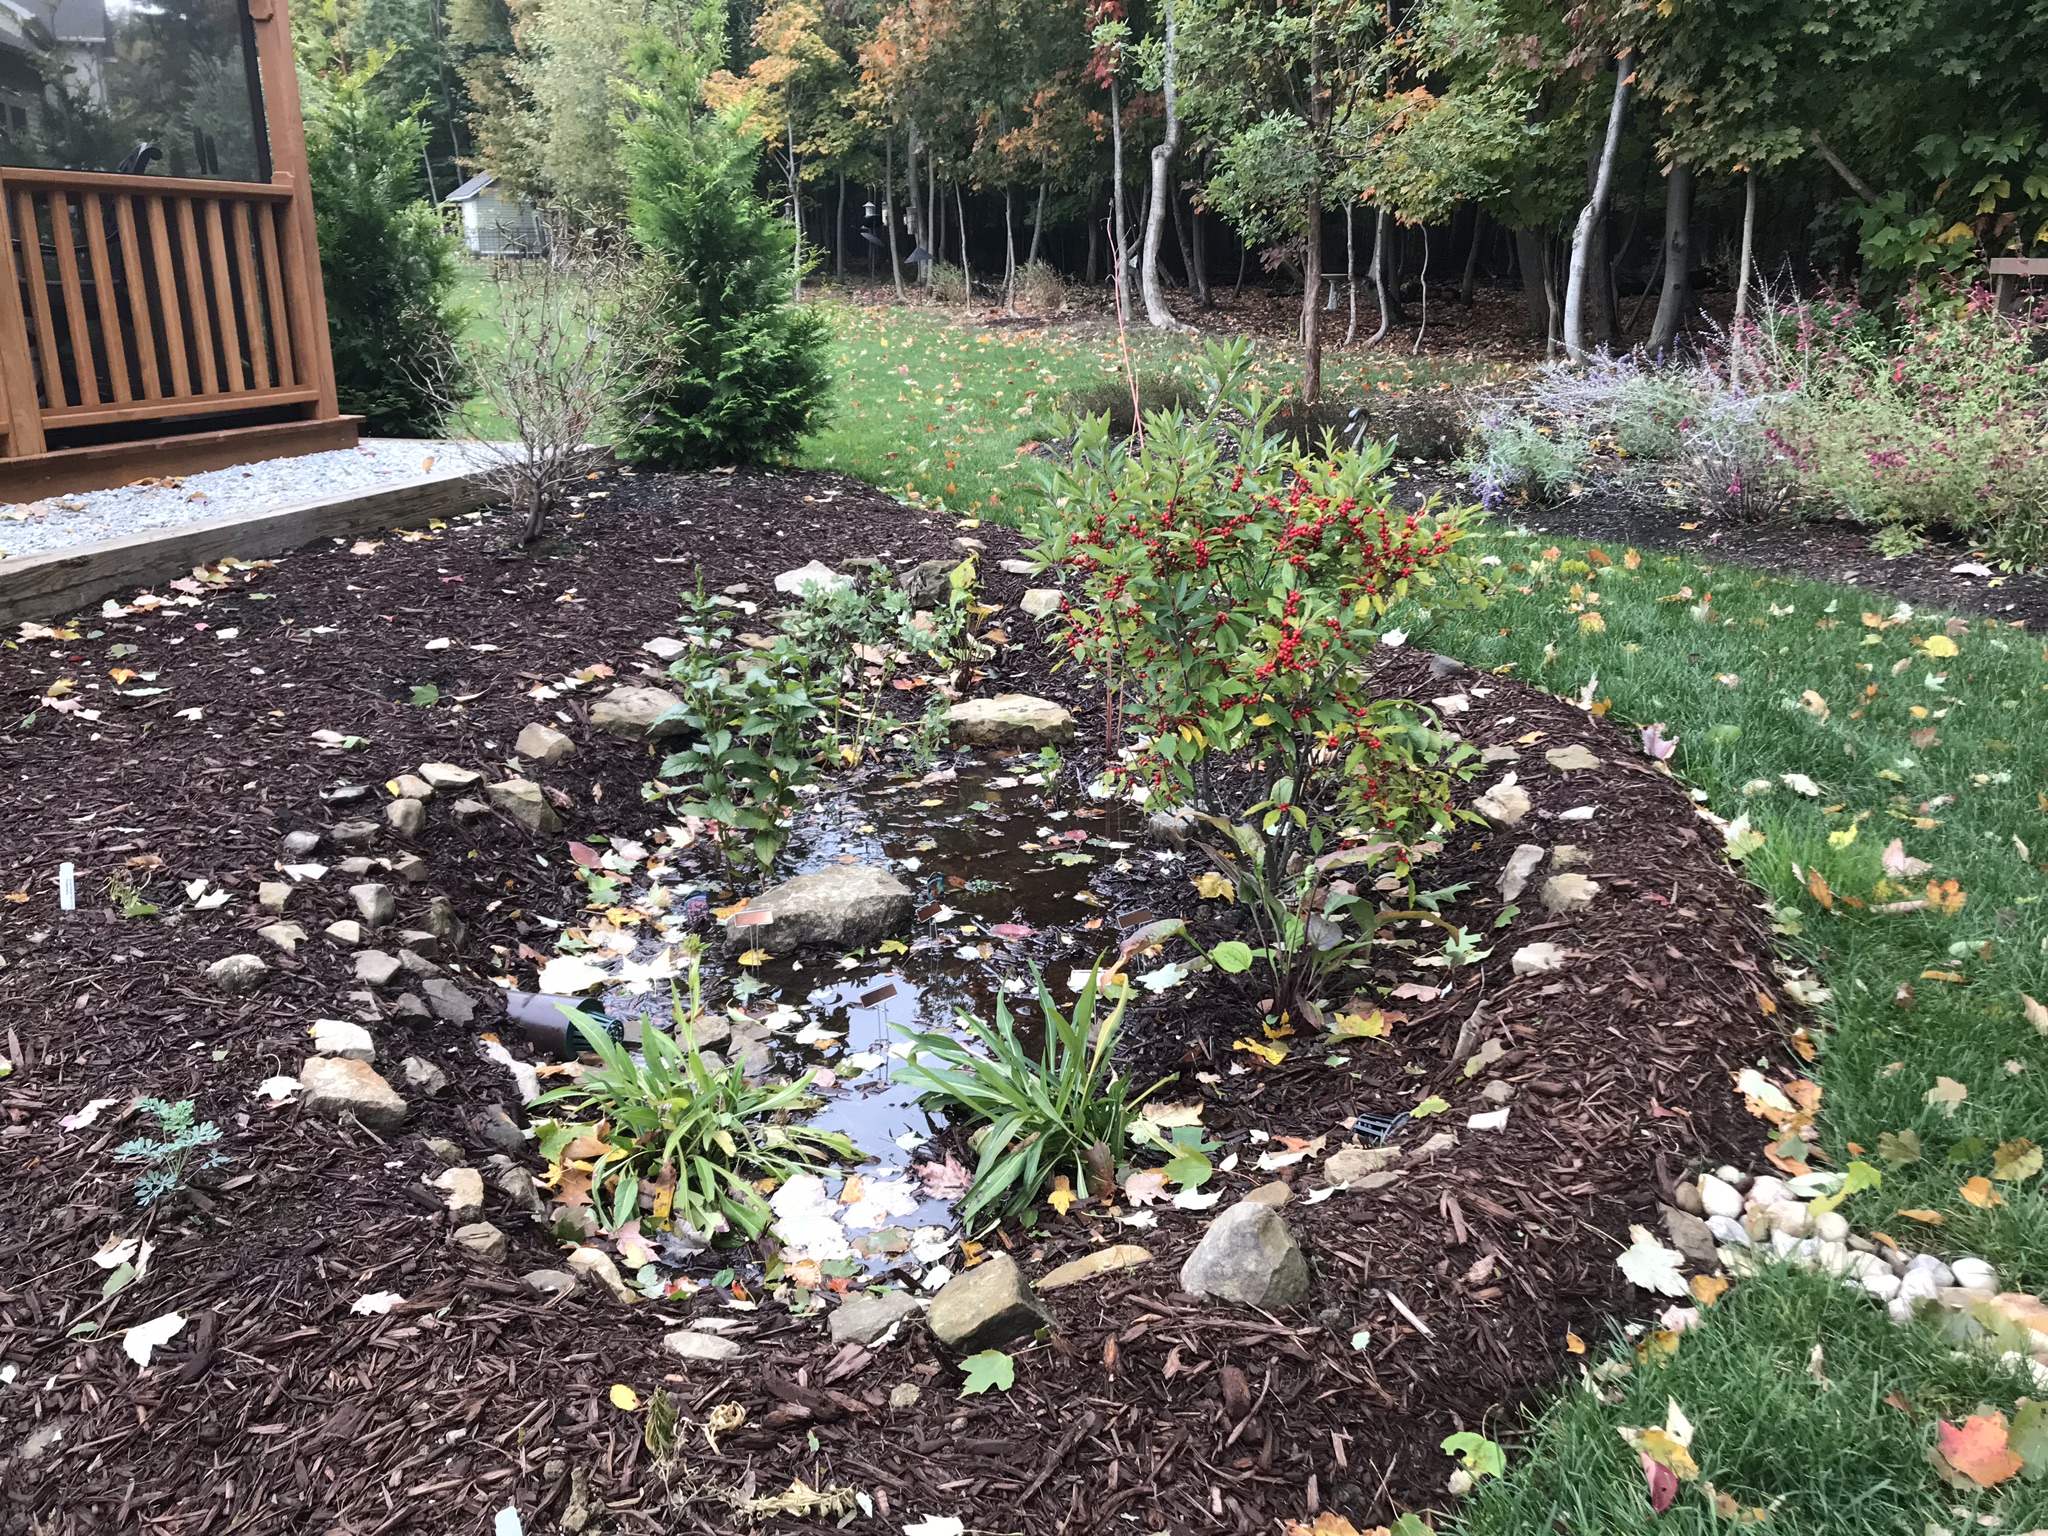 Installing a rain garden? You could be eligible for a rebate